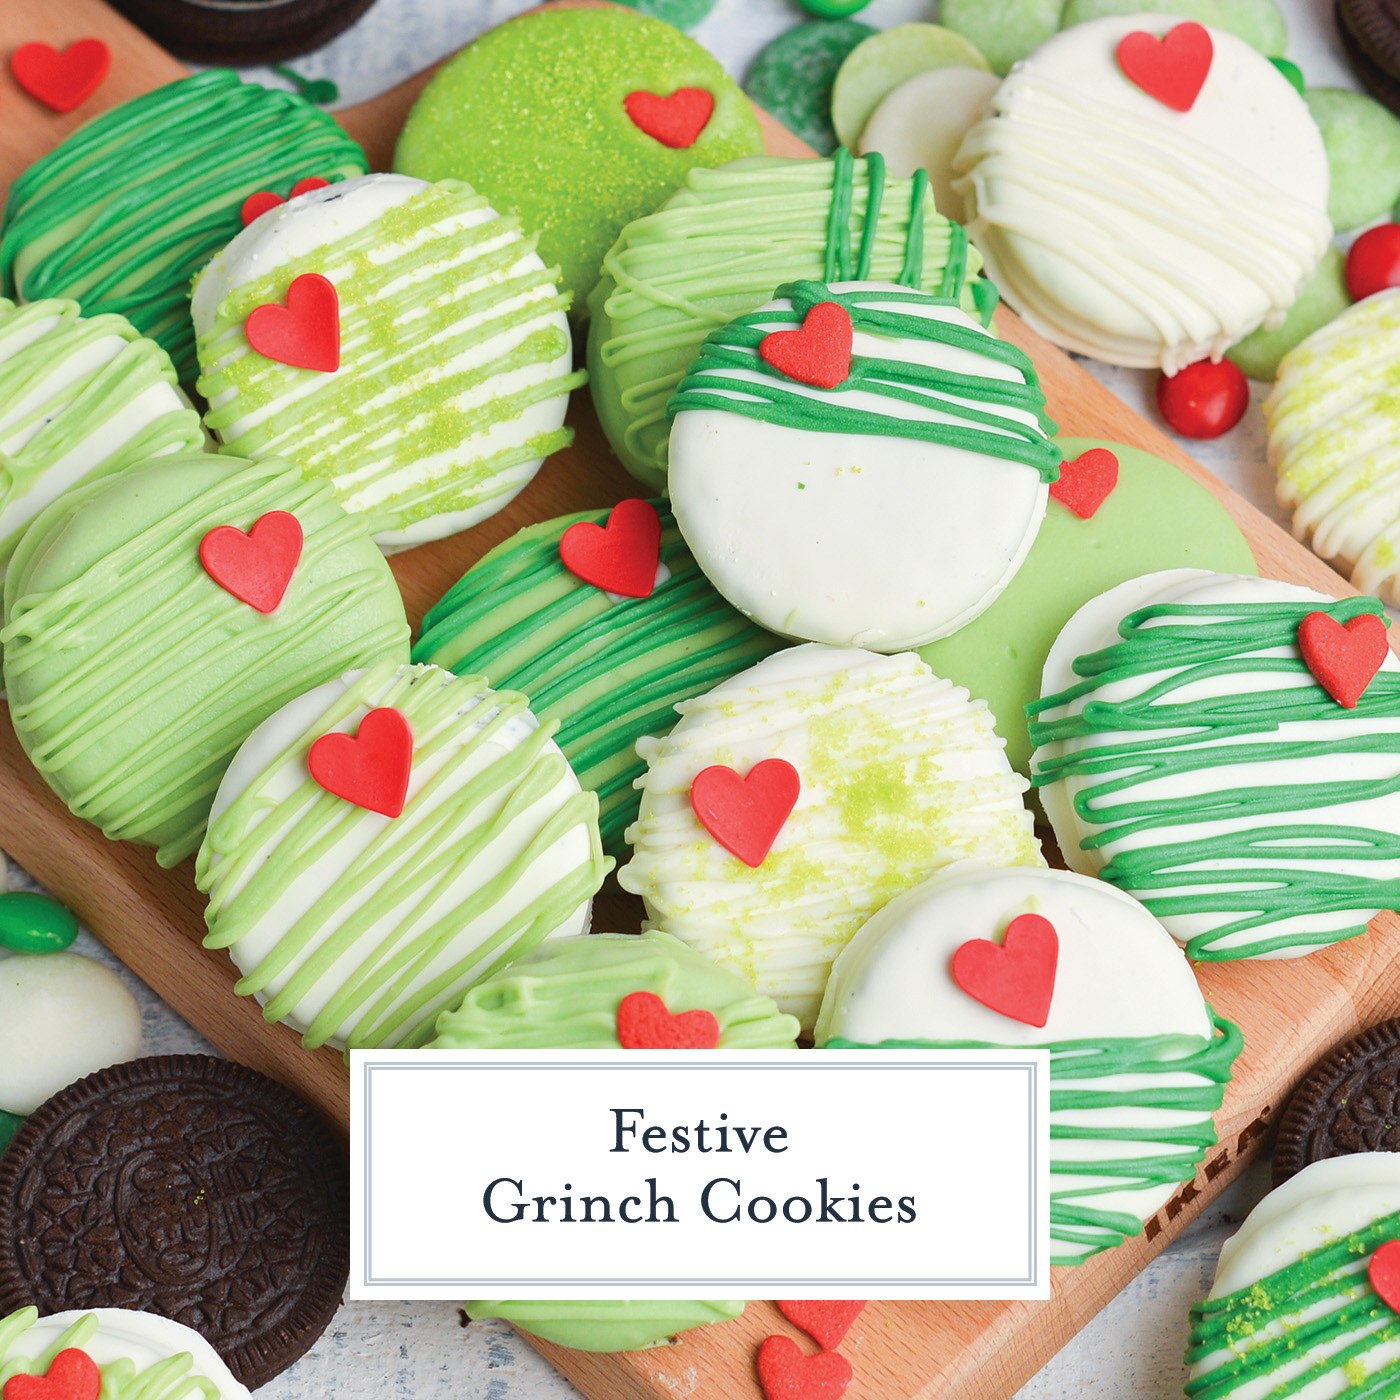 overhead shot of grinch cookies on tray with text overlay for facebook